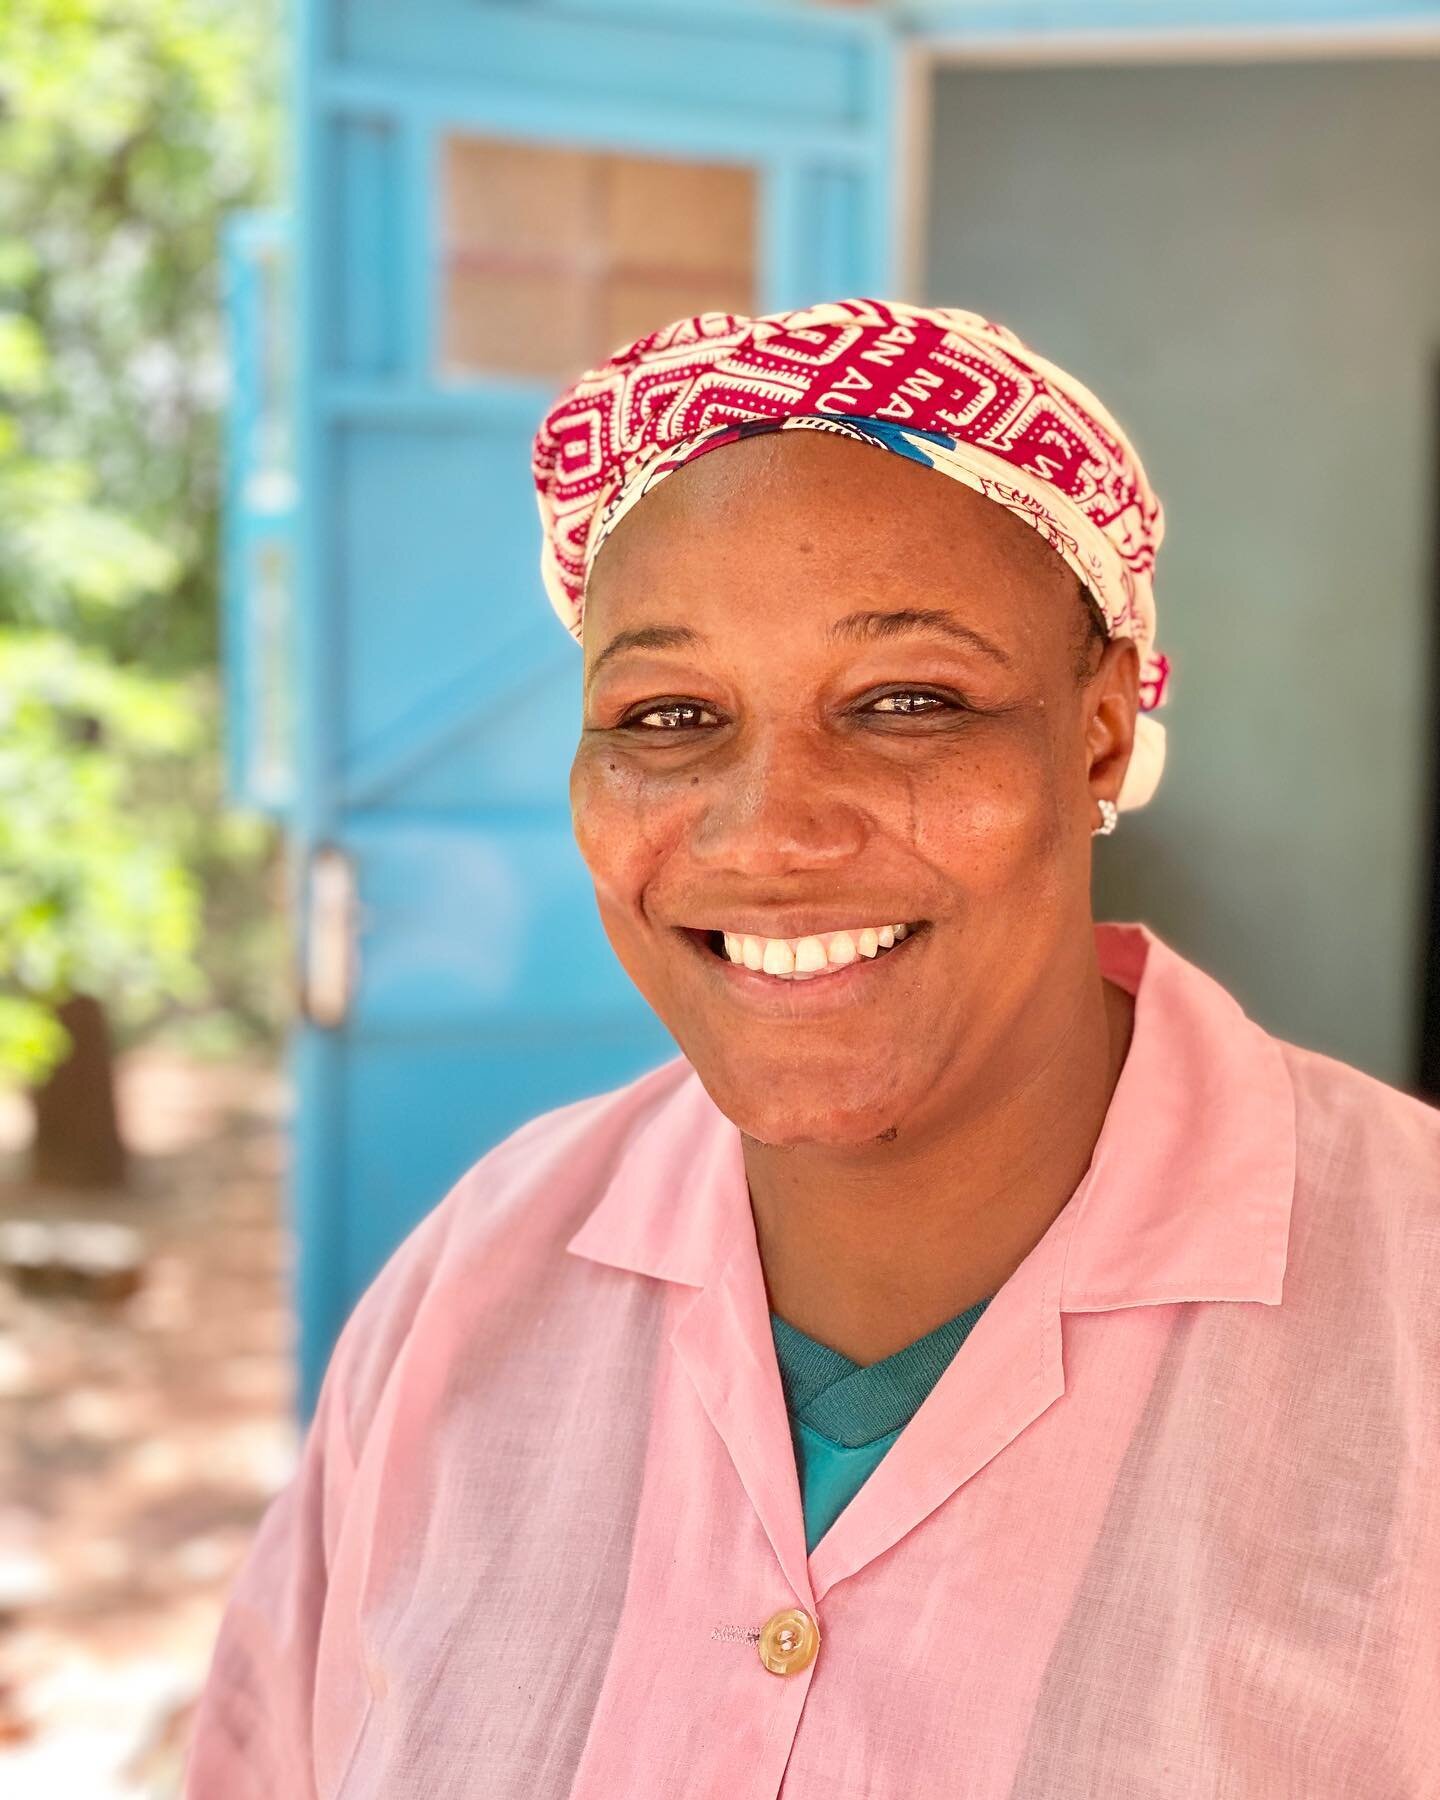 &ldquo;I started working in Danja in 2012. I studied to be a midwife to help women and children.  It&rsquo;s a good thing that this center is here to help women deliver safely and have healthy babies. Some women come at very young ages to deliver bab